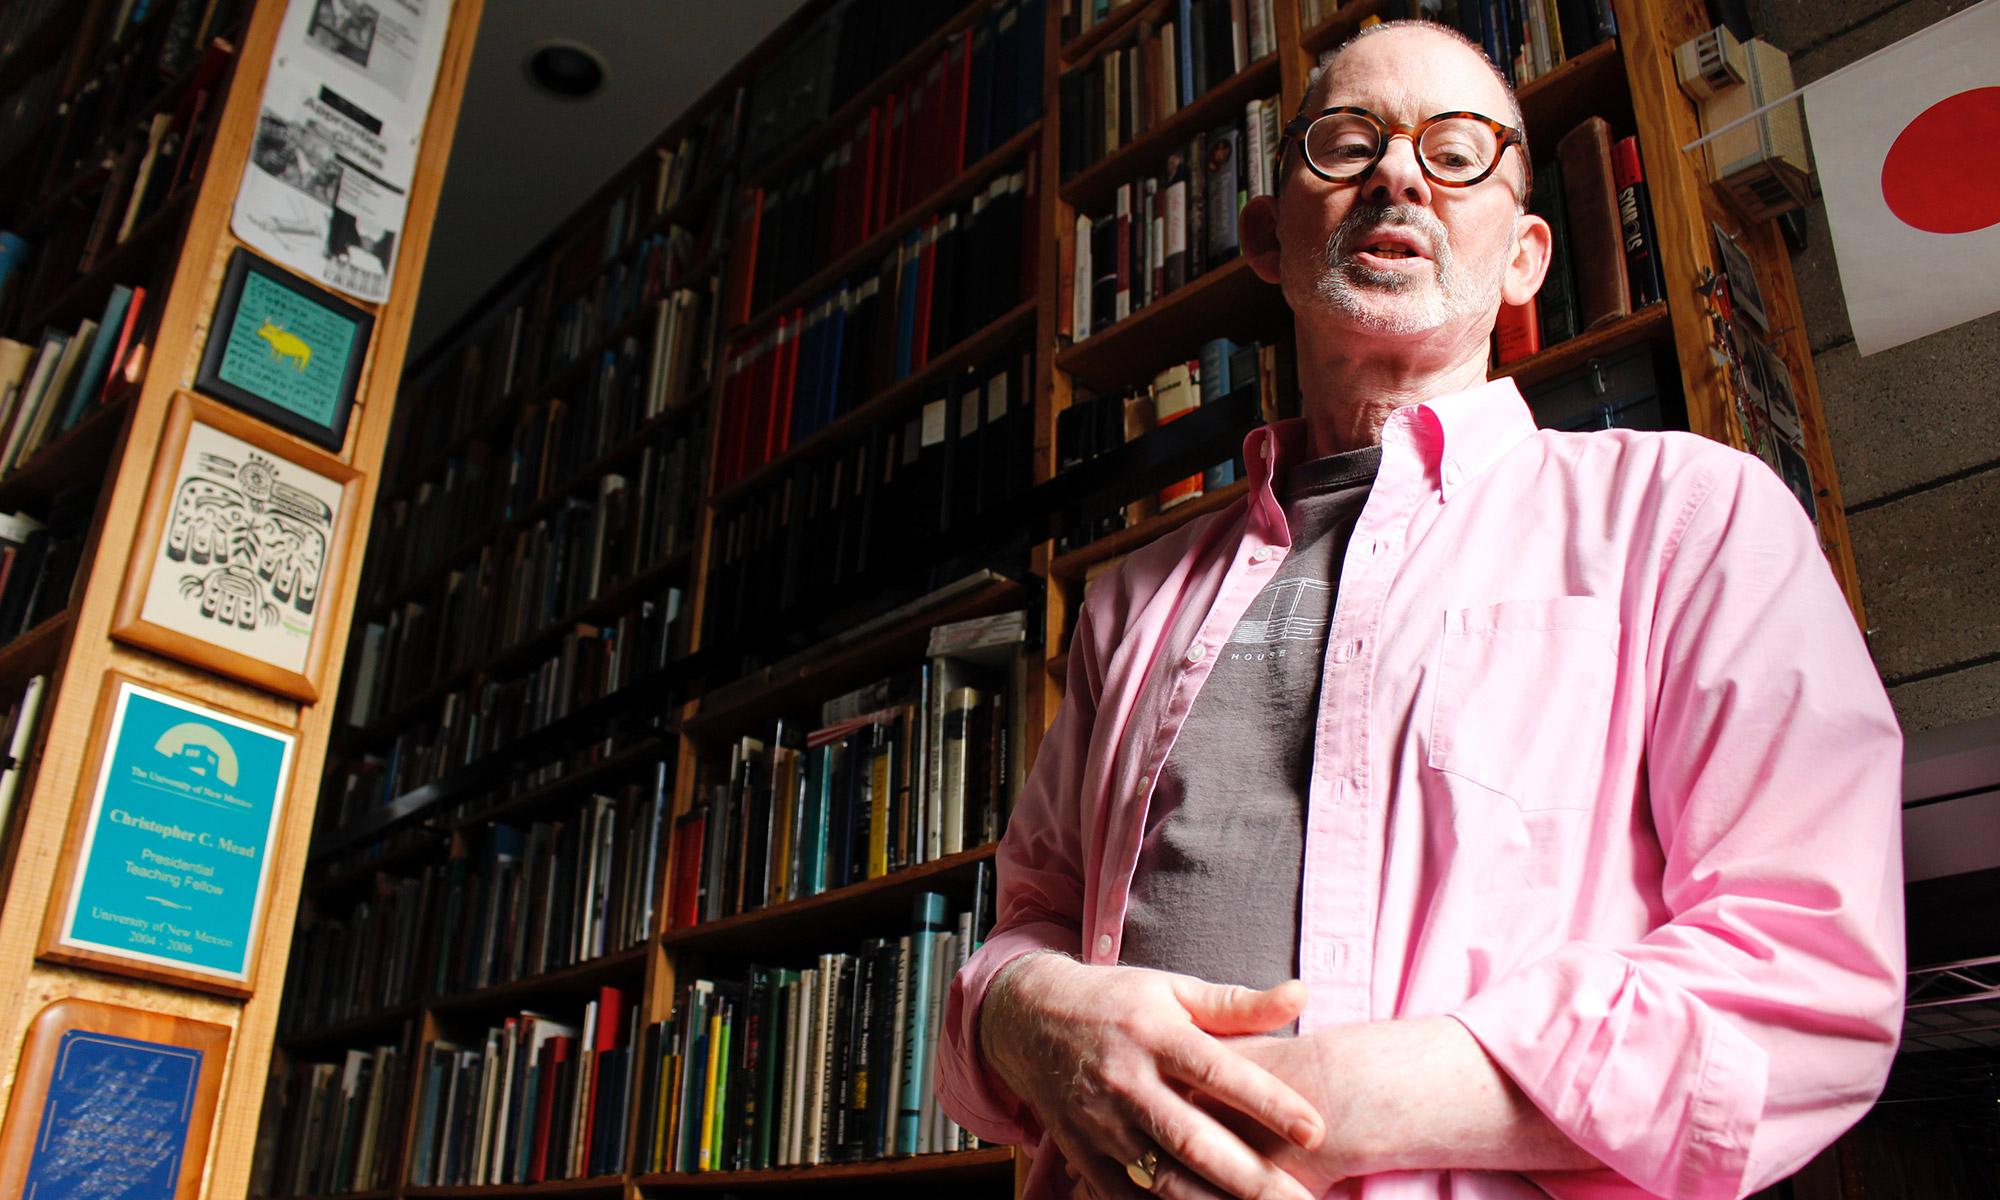 Portrait of Christopher Mead, wearing a pink shirt and standing in front of a huge bookshelf completely full of books